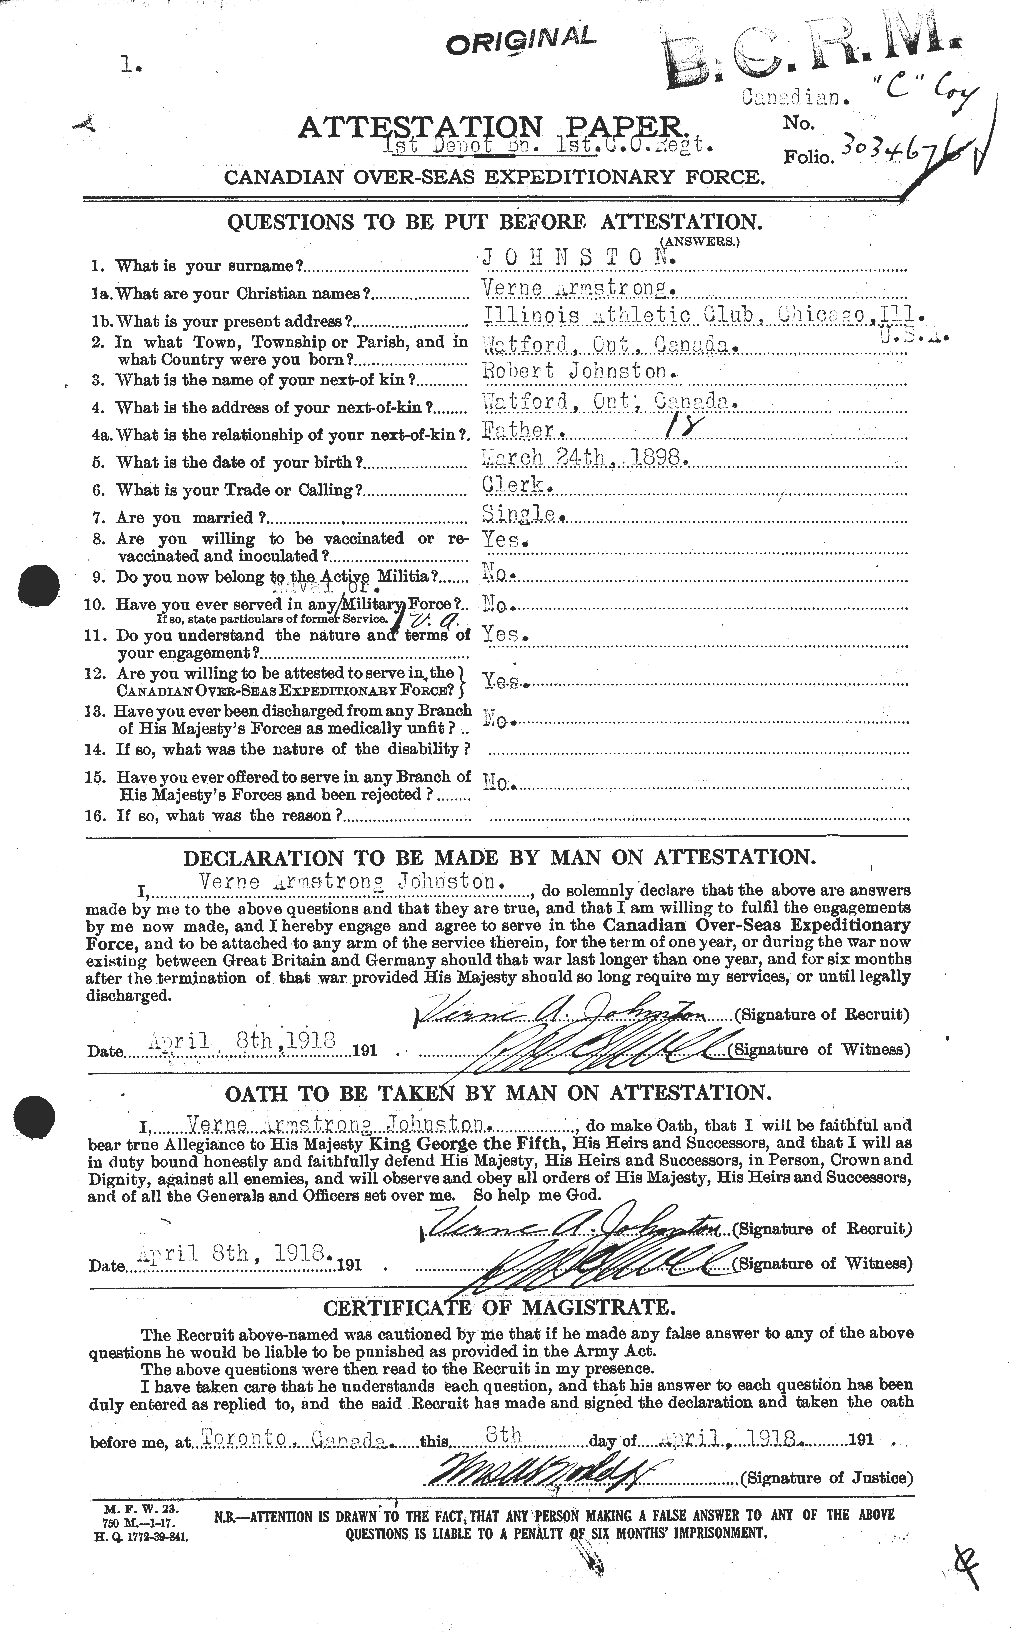 Personnel Records of the First World War - CEF 427186a